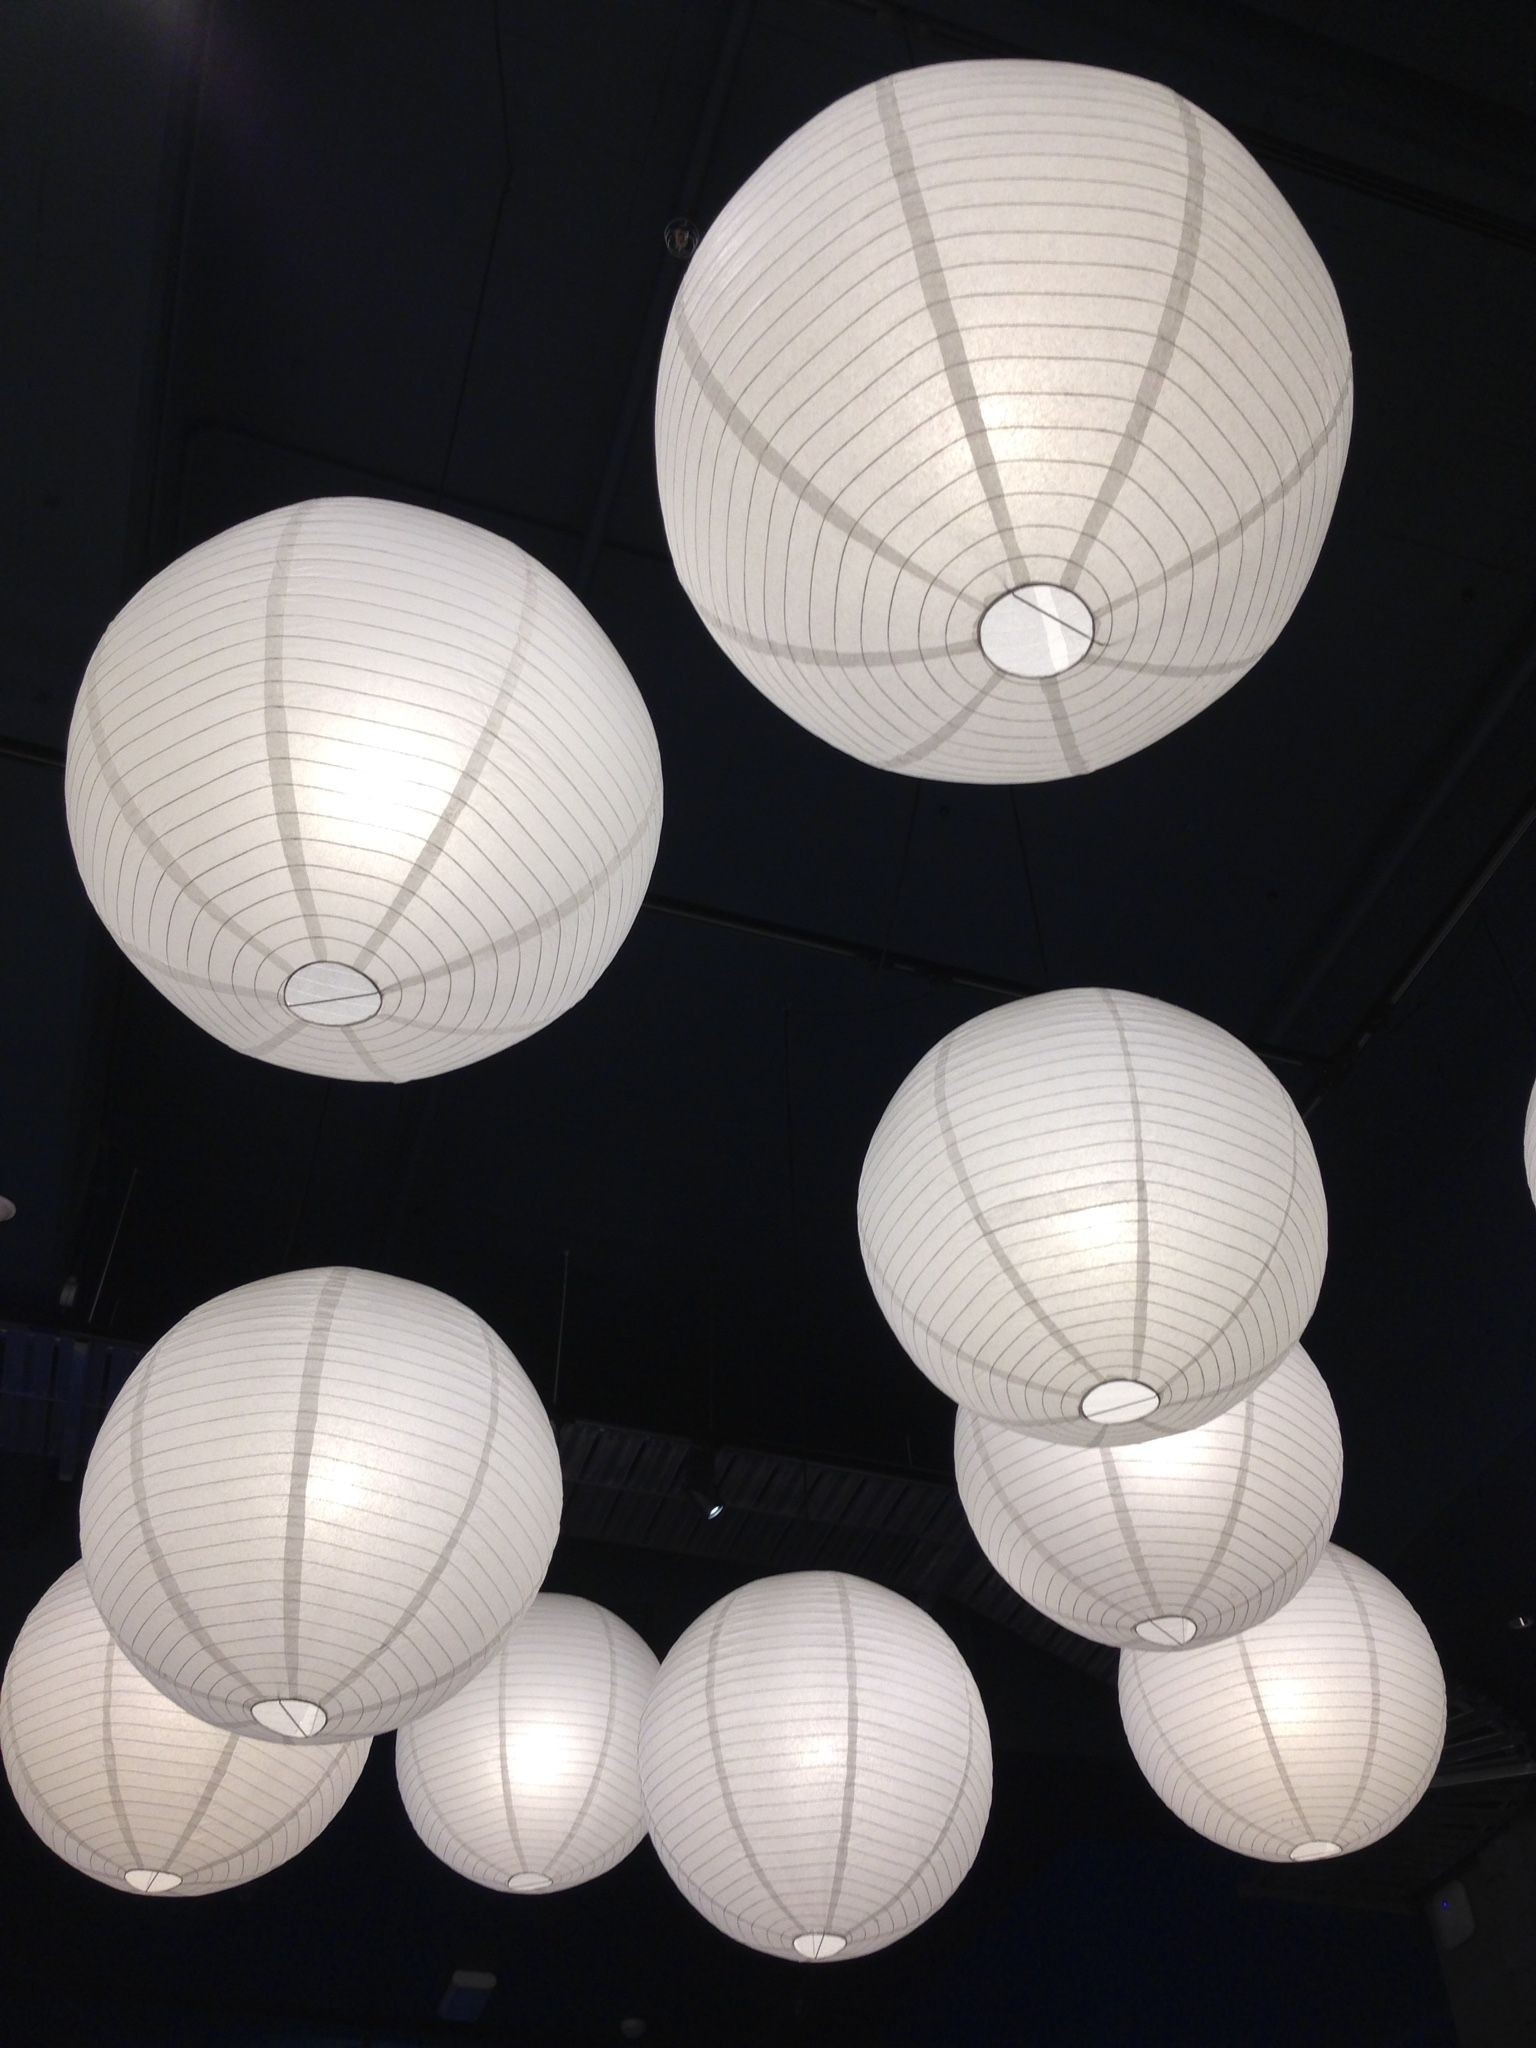 Rice paper lamps at auckland museum